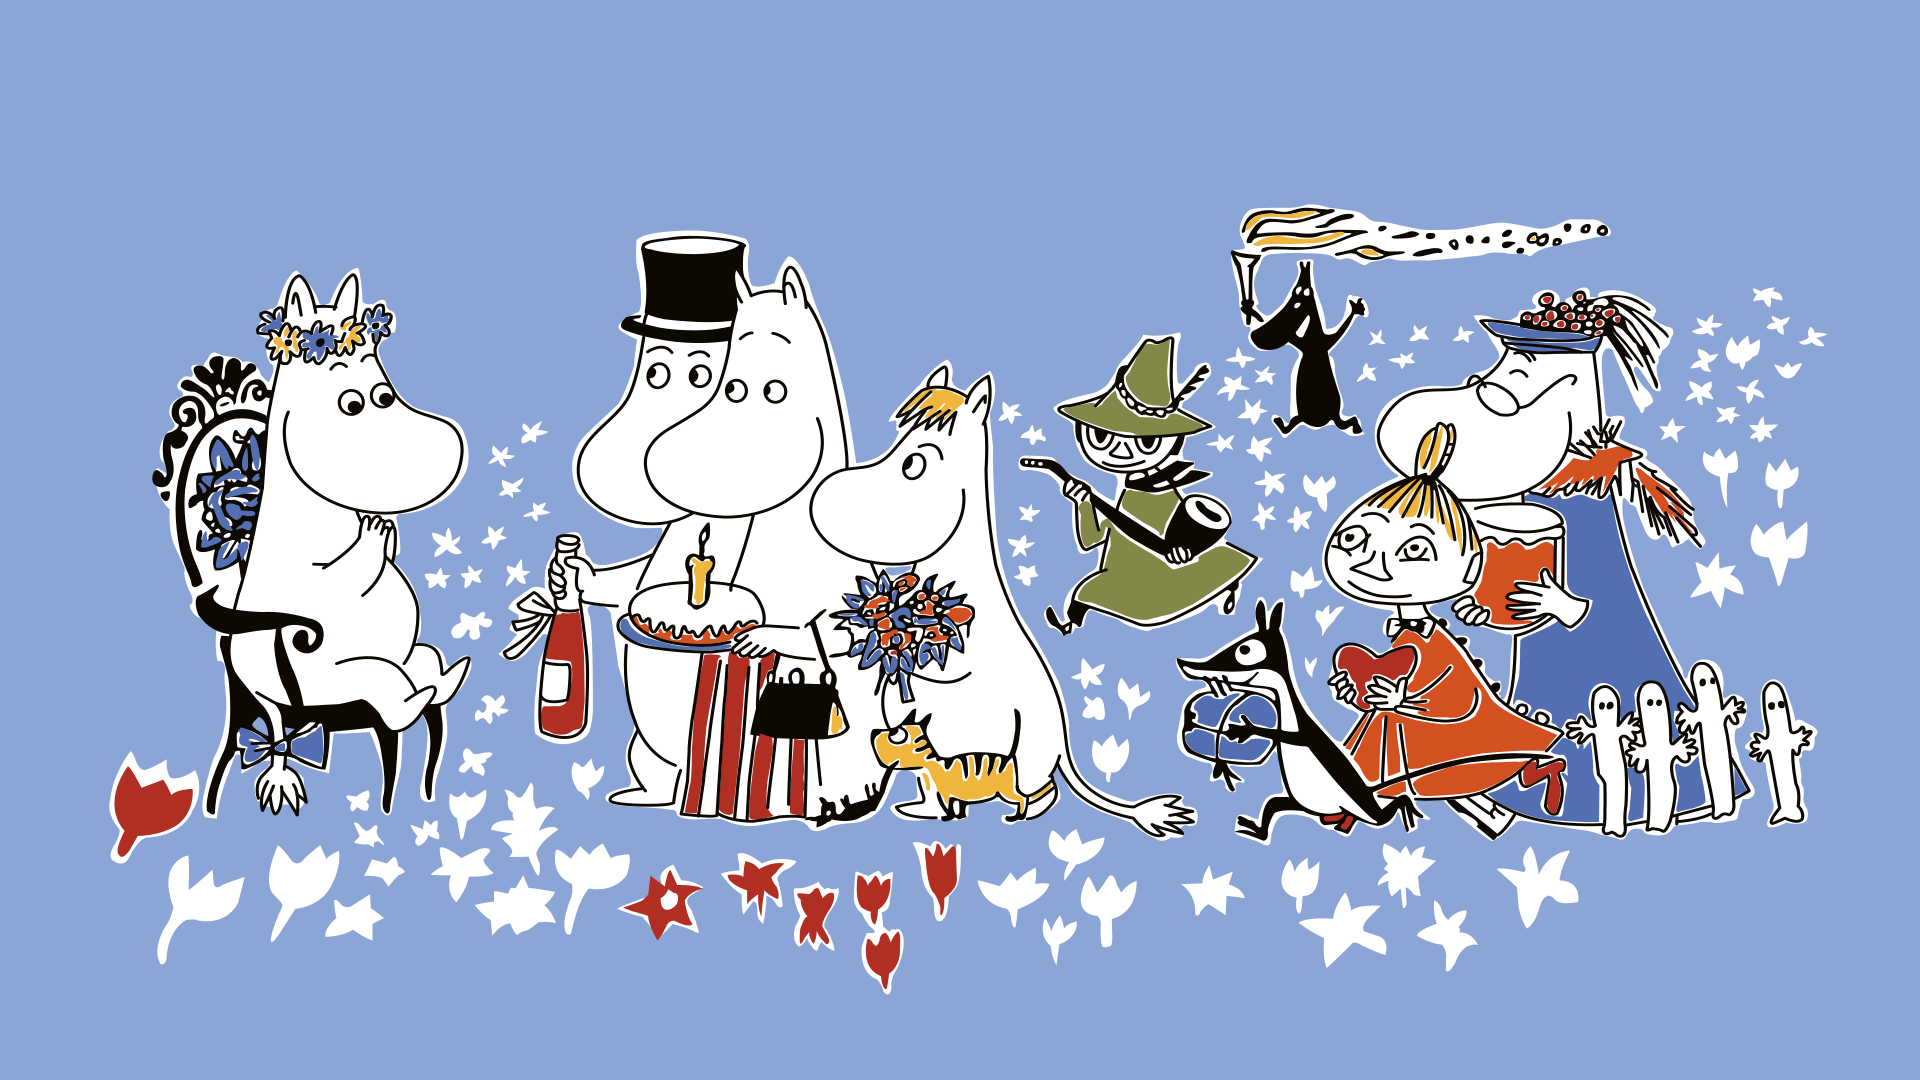 Anime 1920x1080 The Moomins minimalism simple background chair anime creatures running blue background creature anime flower crown hat cake candles purse